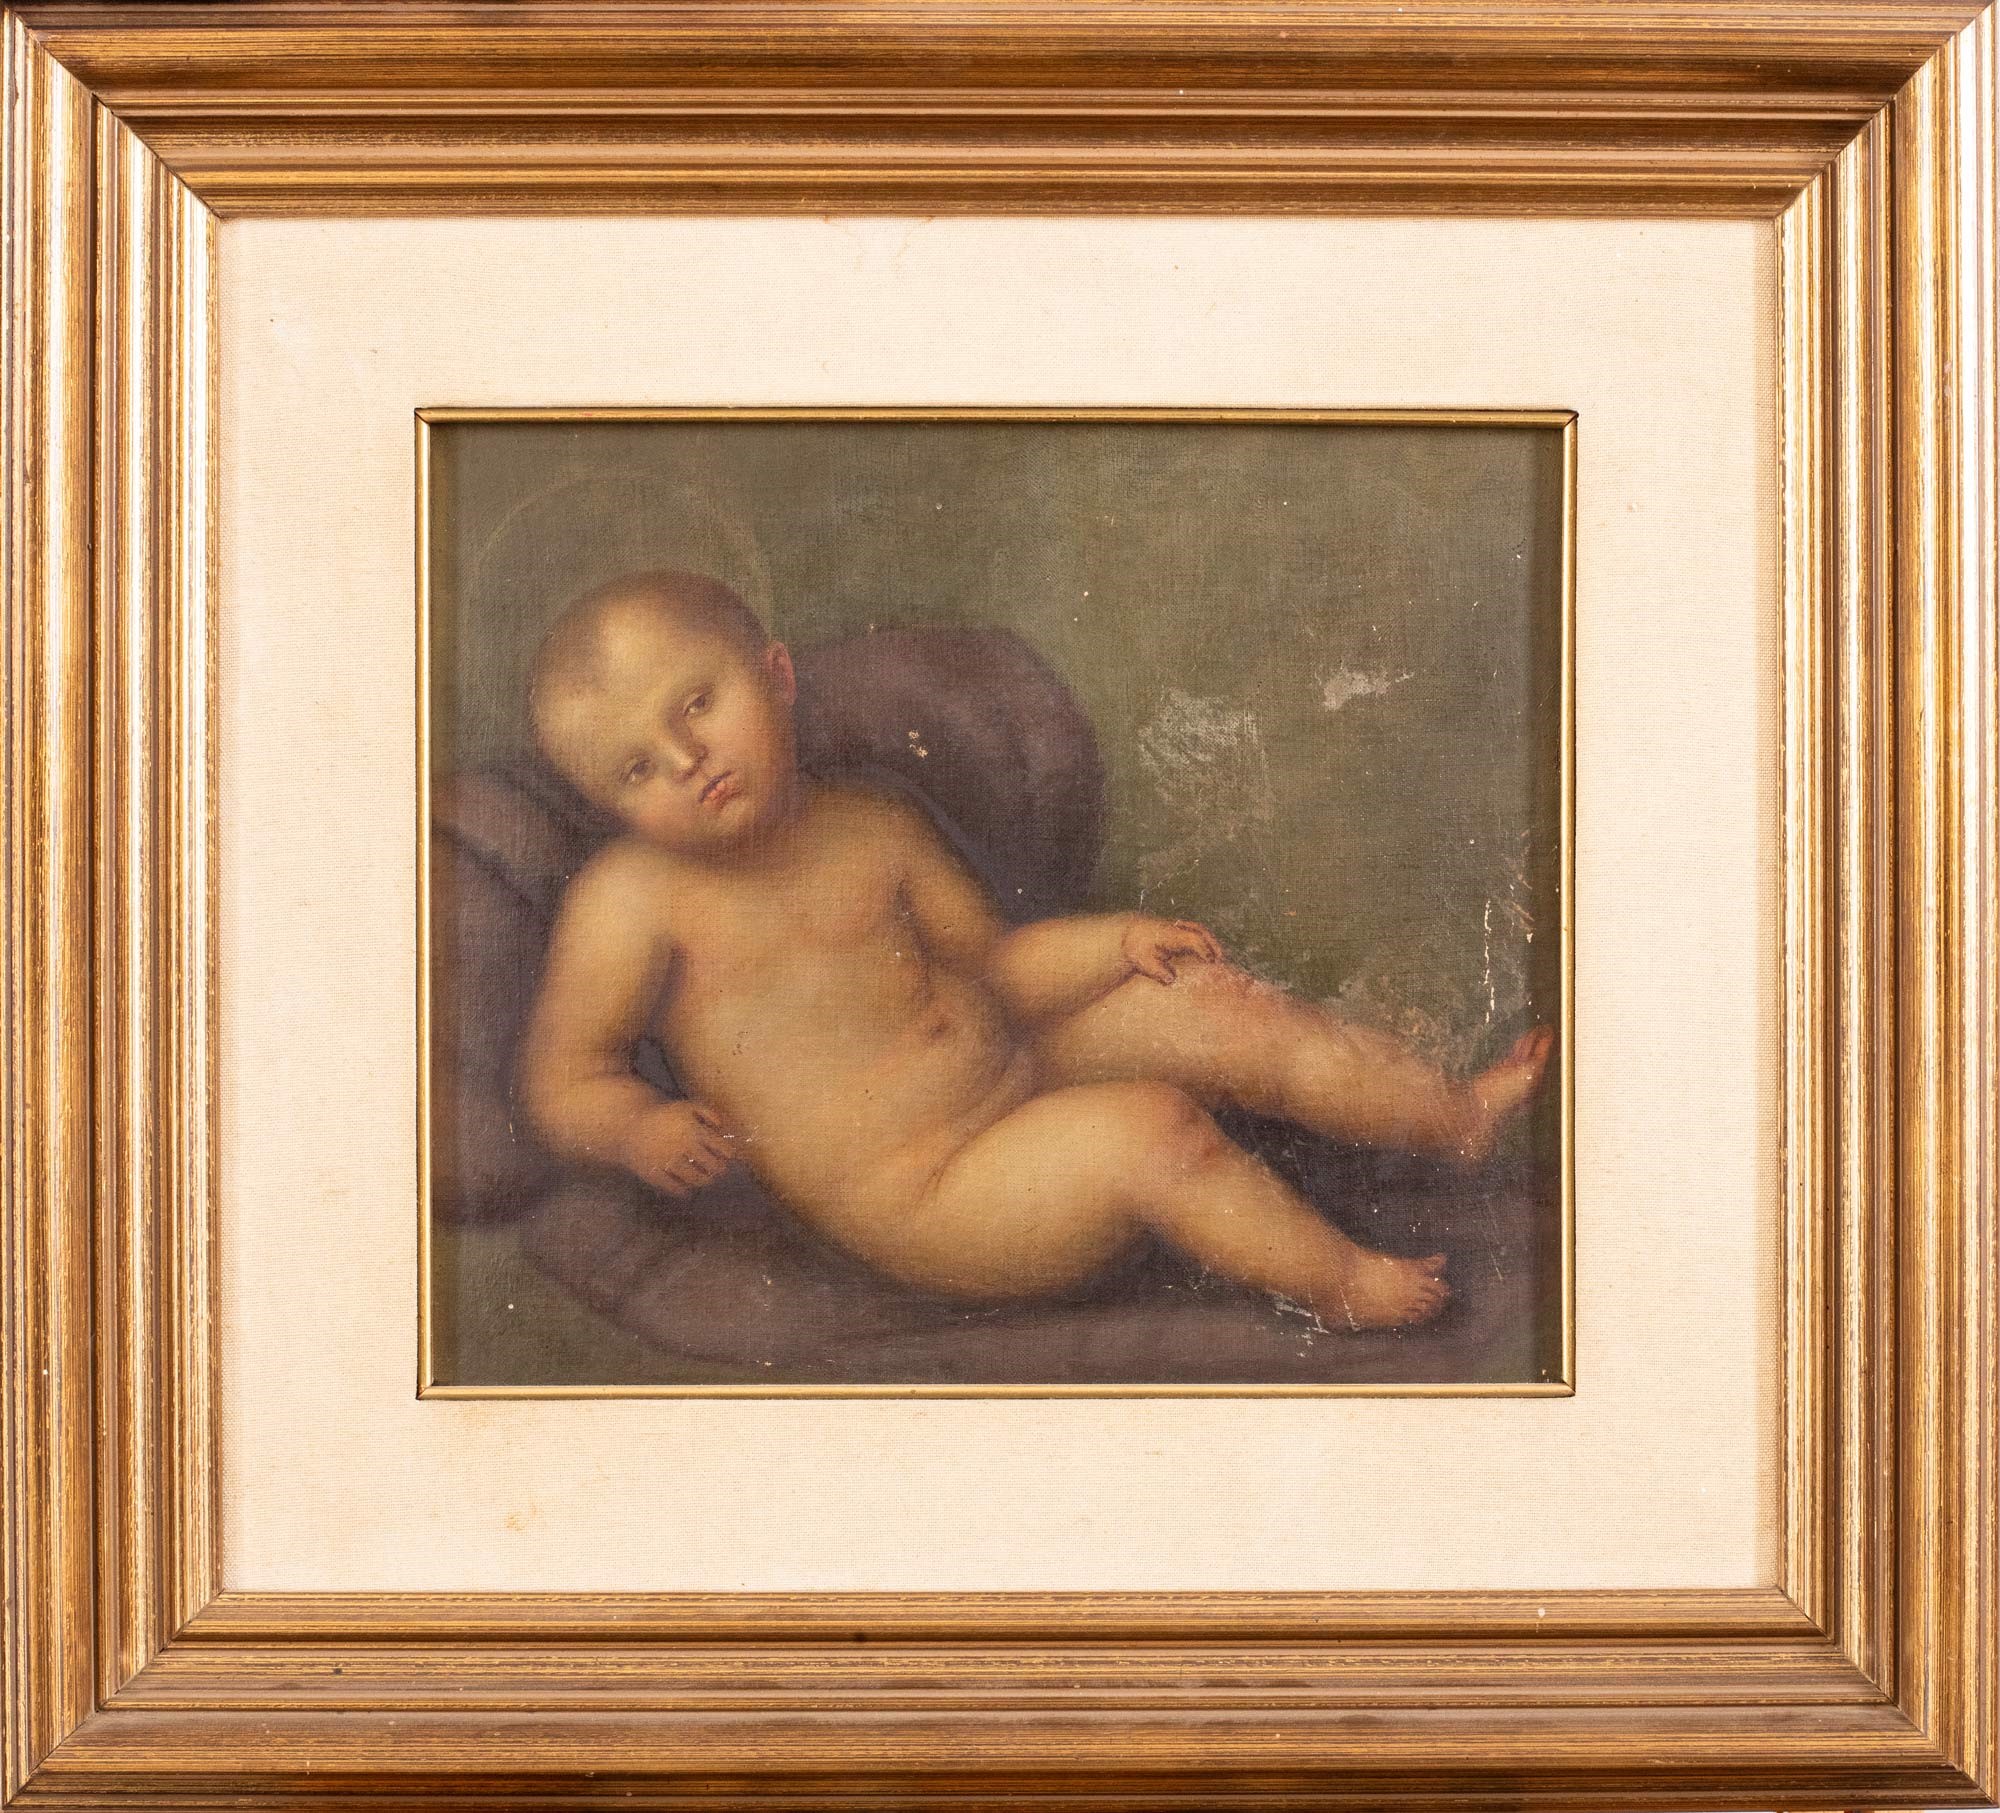 baby Jesus Italy, late 19th- early 20th century, oil painting on canvasin the frame, diffuse drops